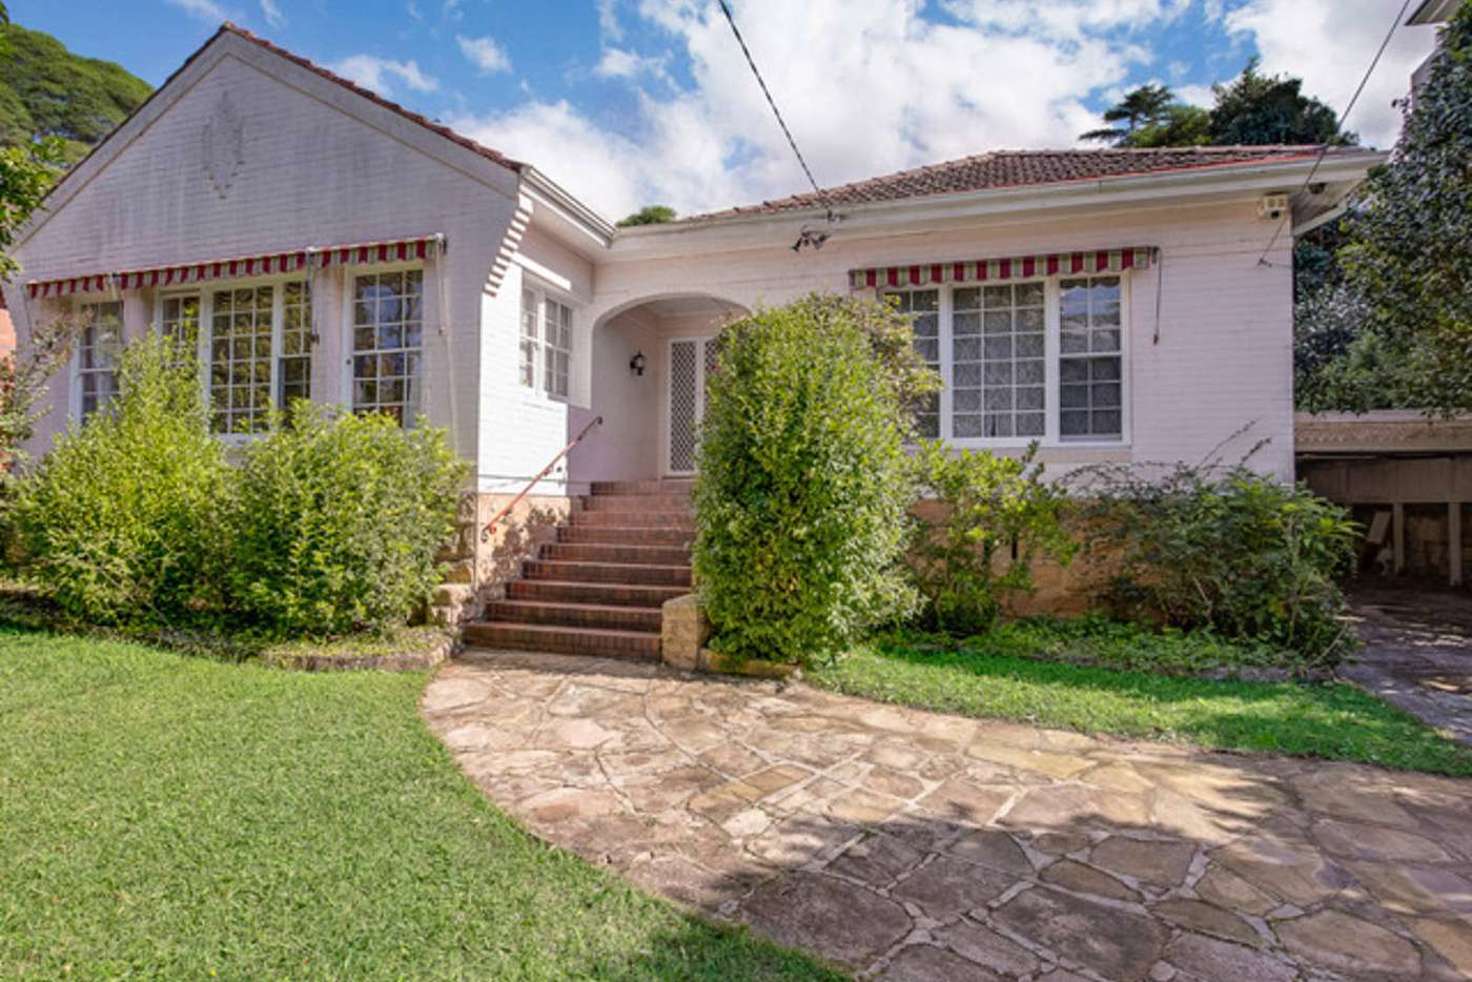 Main view of Homely house listing, 2 Caithness St, Killara NSW 2071